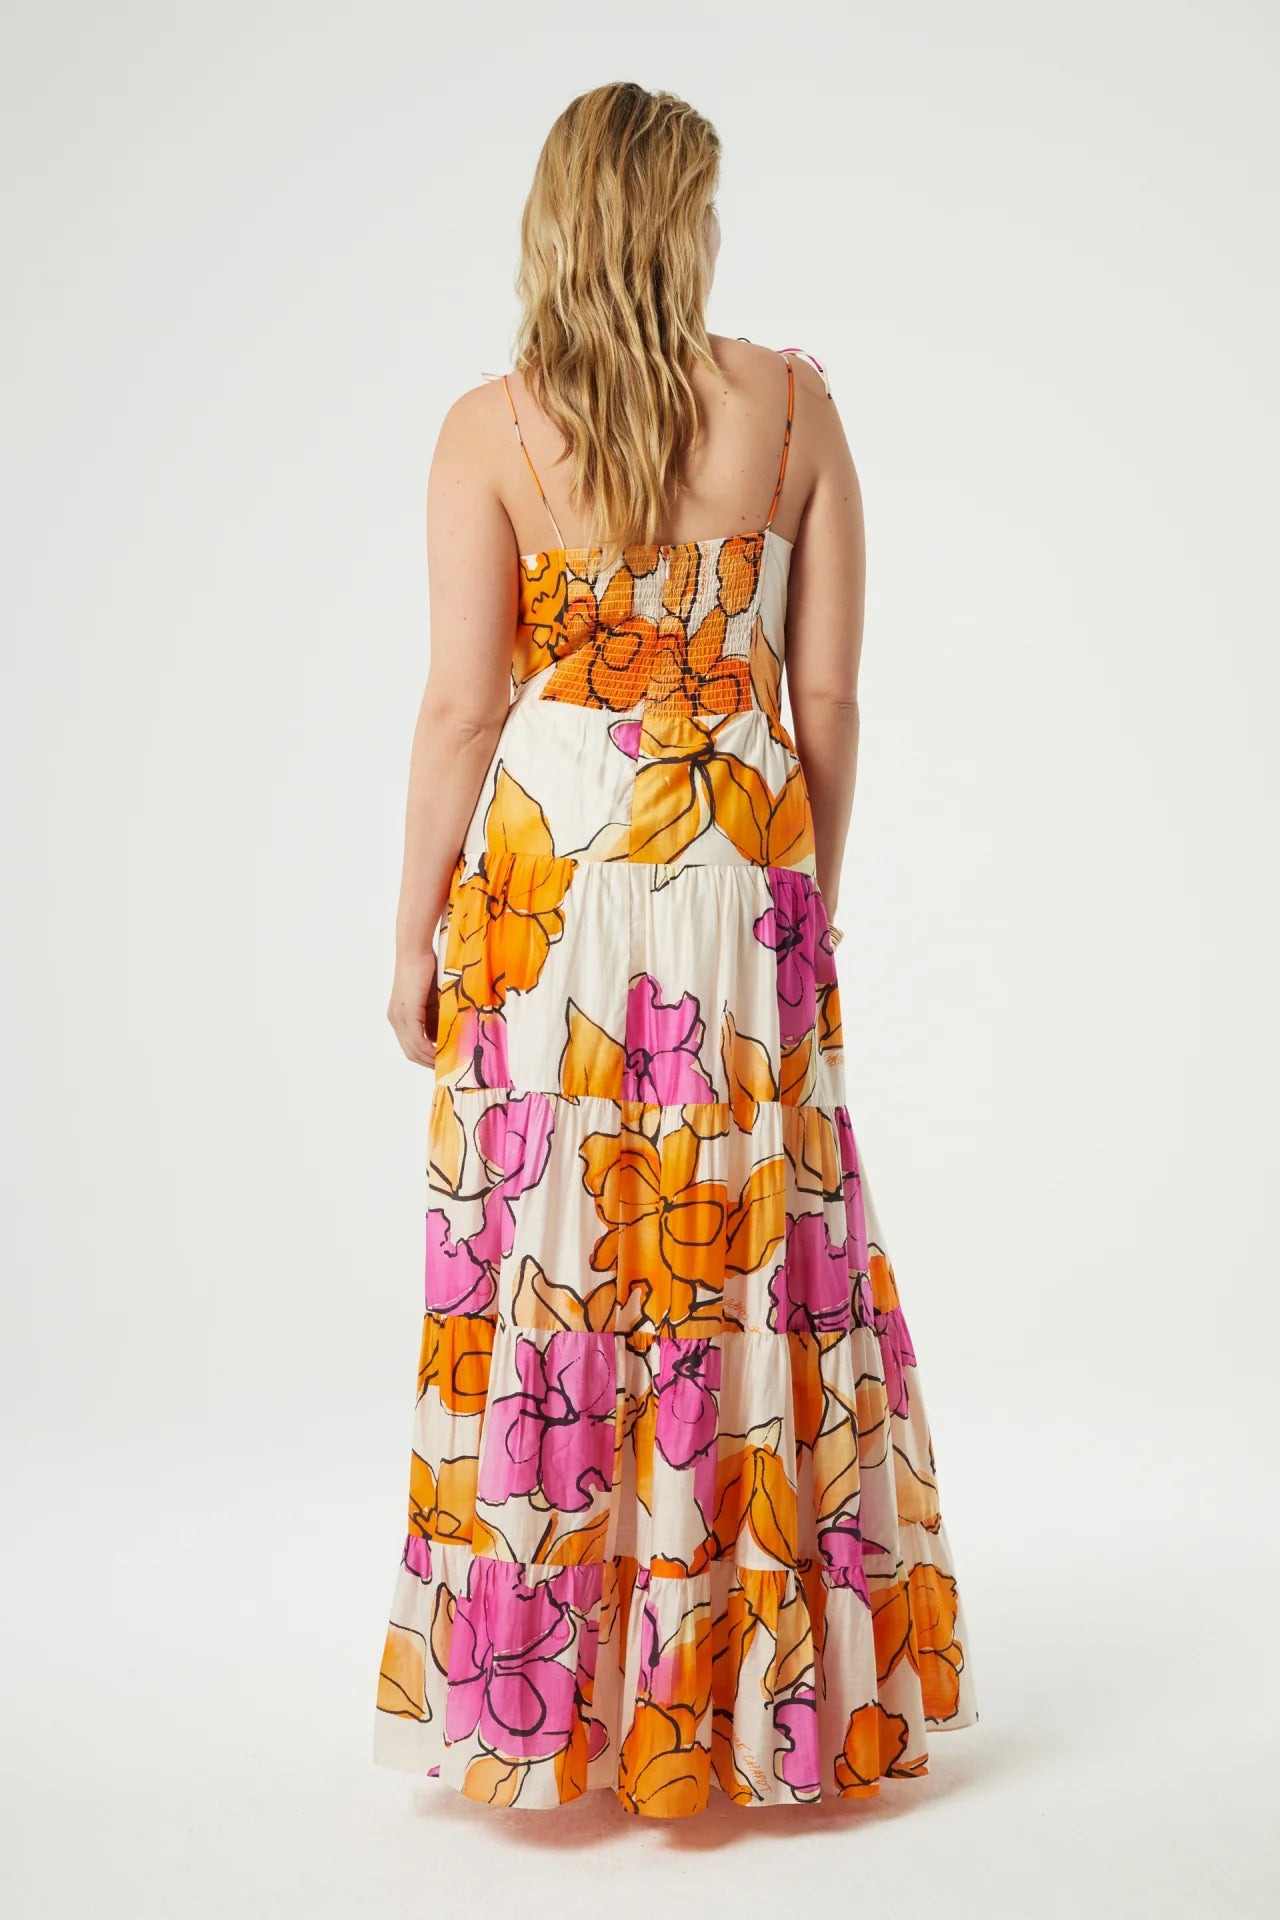 Maxi dress with thin straps in orange and pink floral print